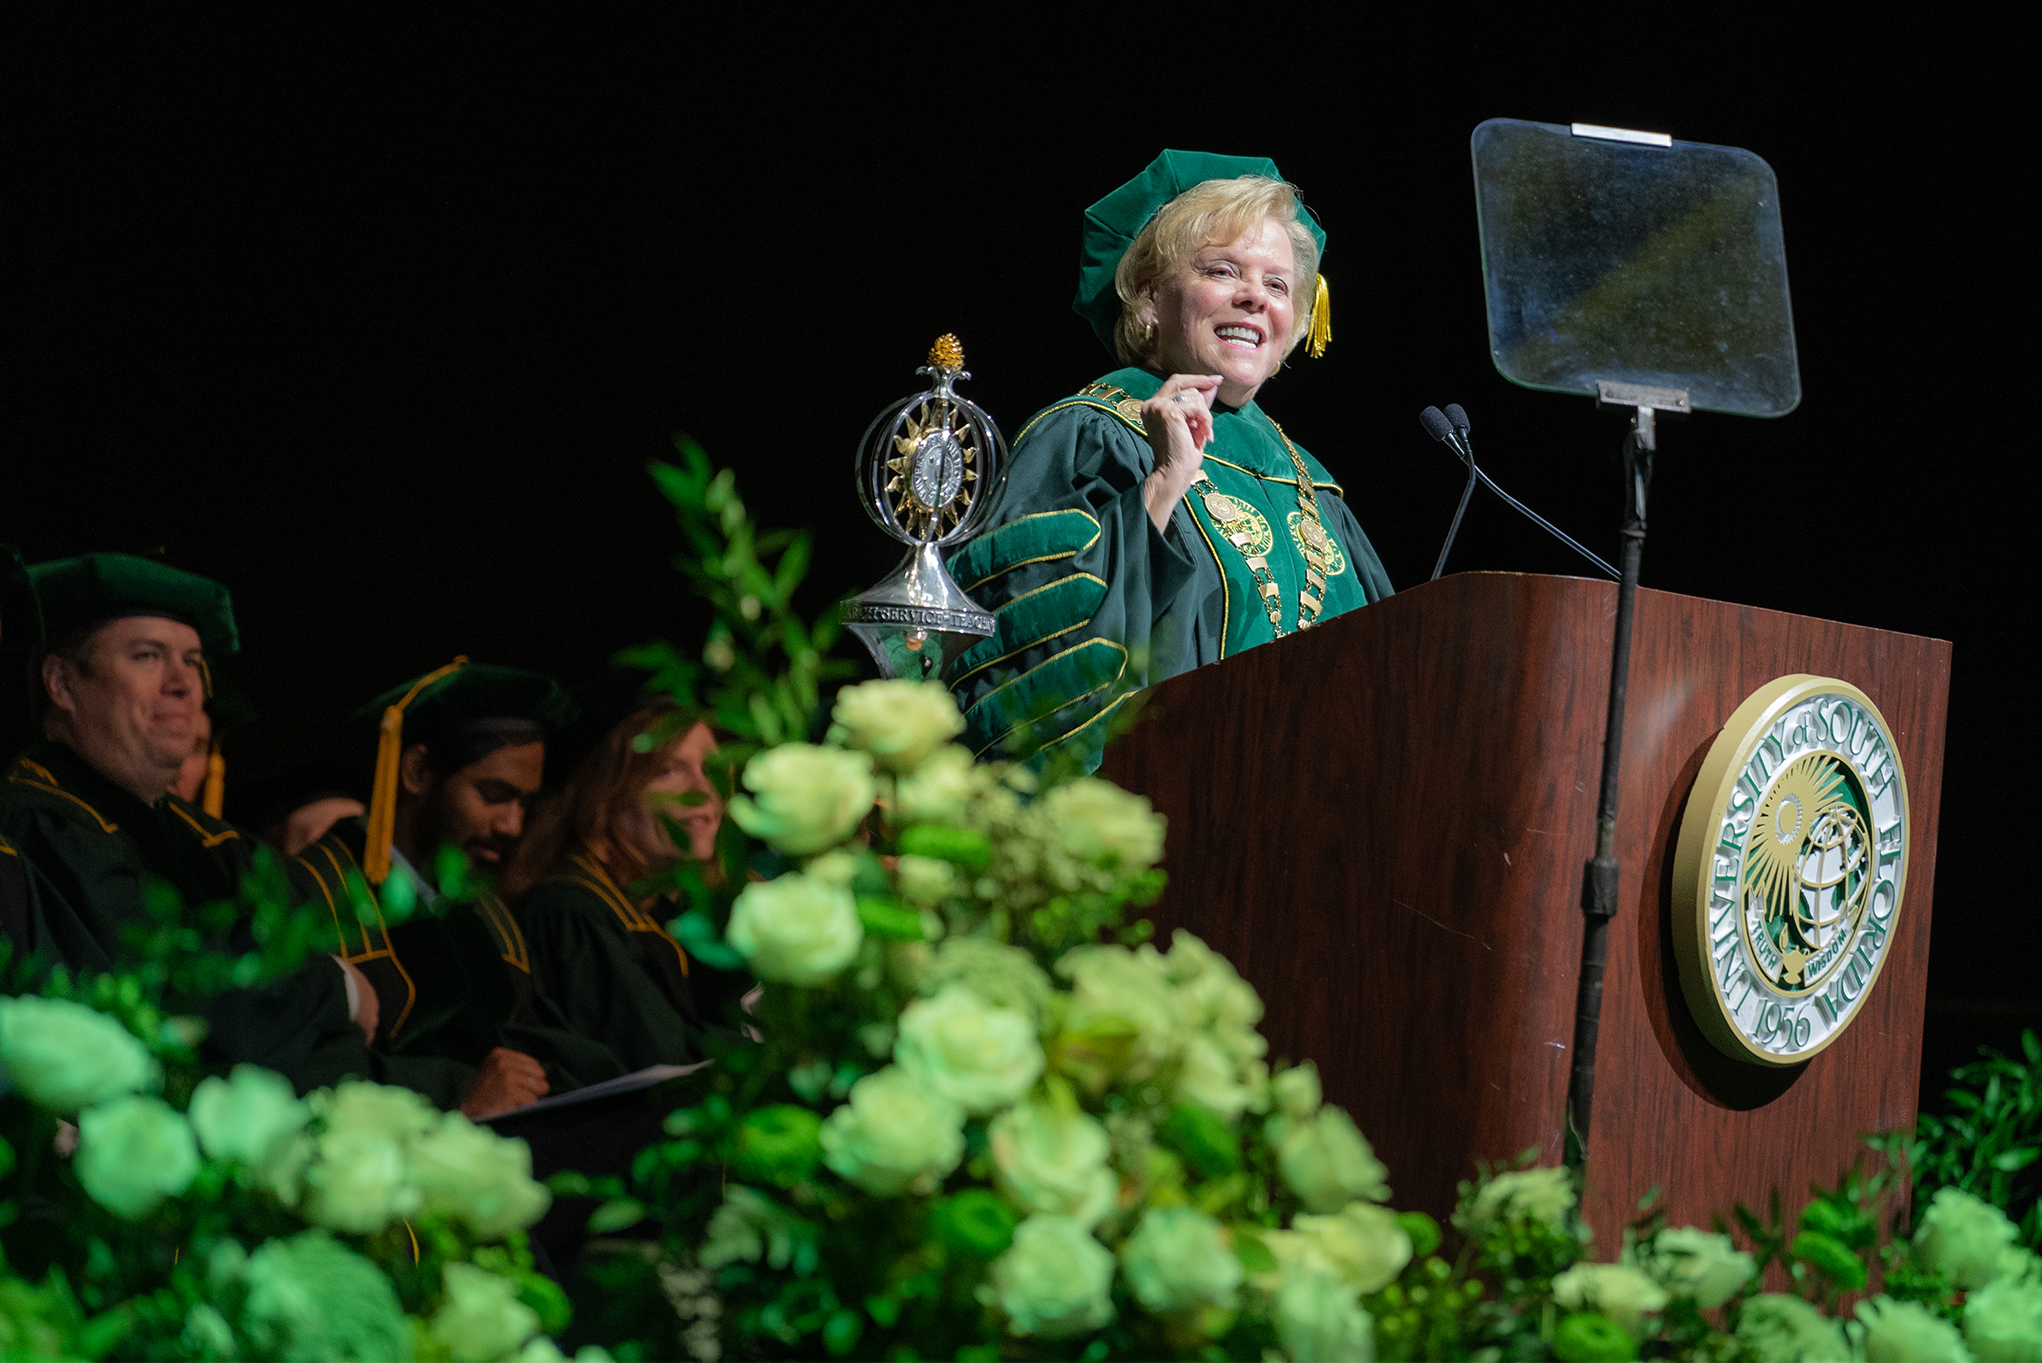 Please join Rhea F. Law the eighth president of the University of South Florida for a Presidential Inauguration Reception